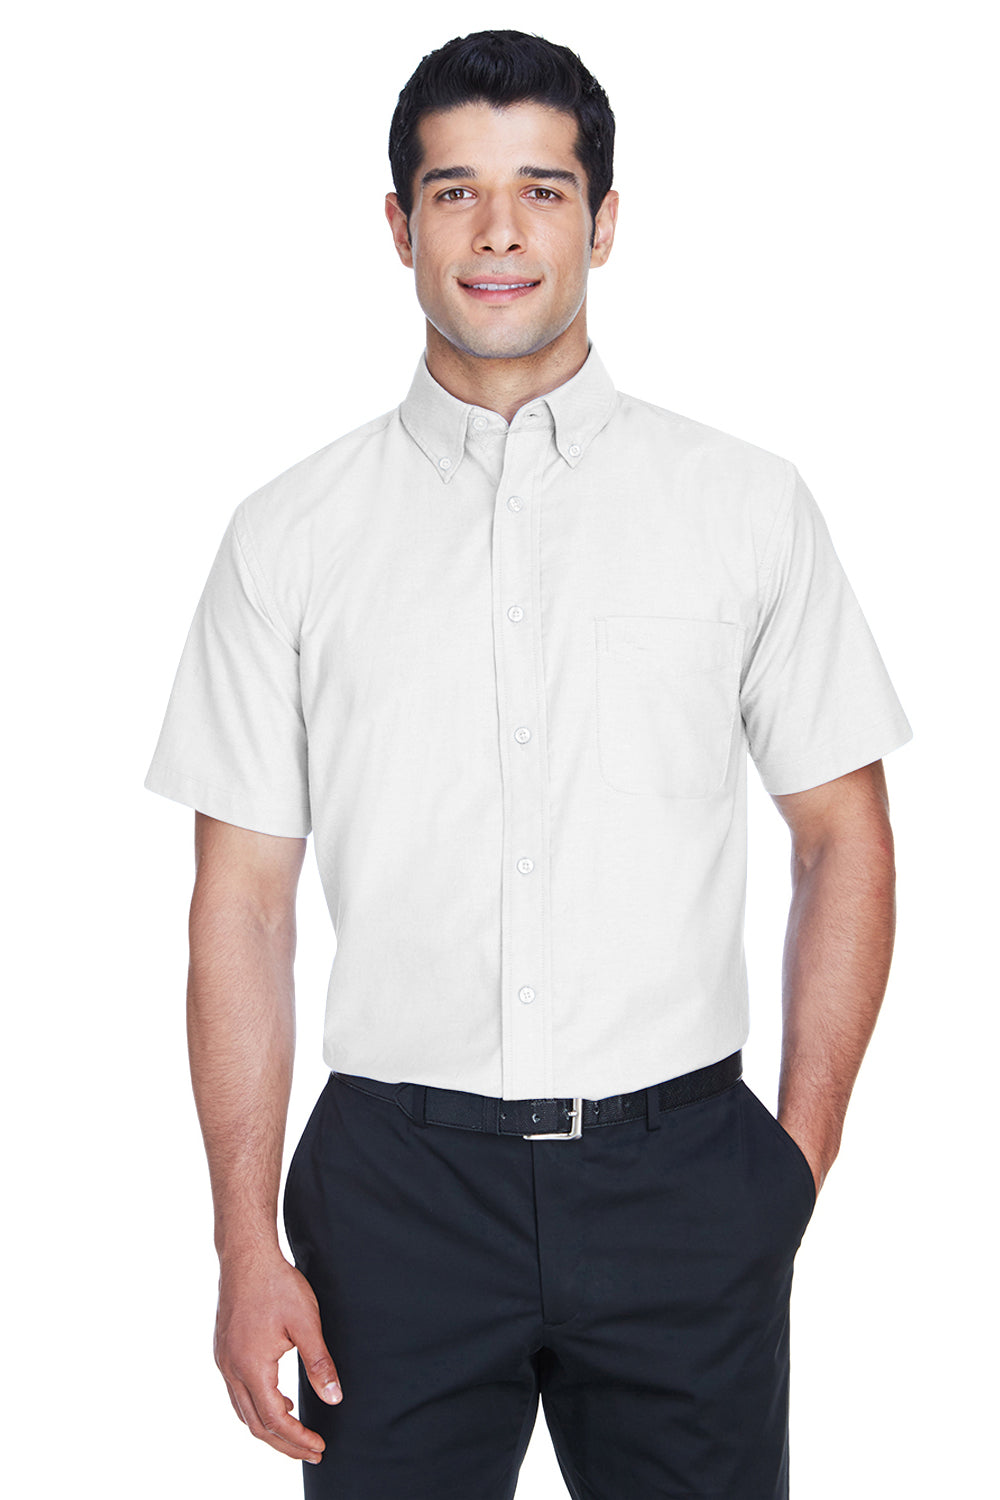 Harriton M600S Mens Oxford Wrinkle Resistant Short Sleeve Button Down Shirt w/ Pocket White Front